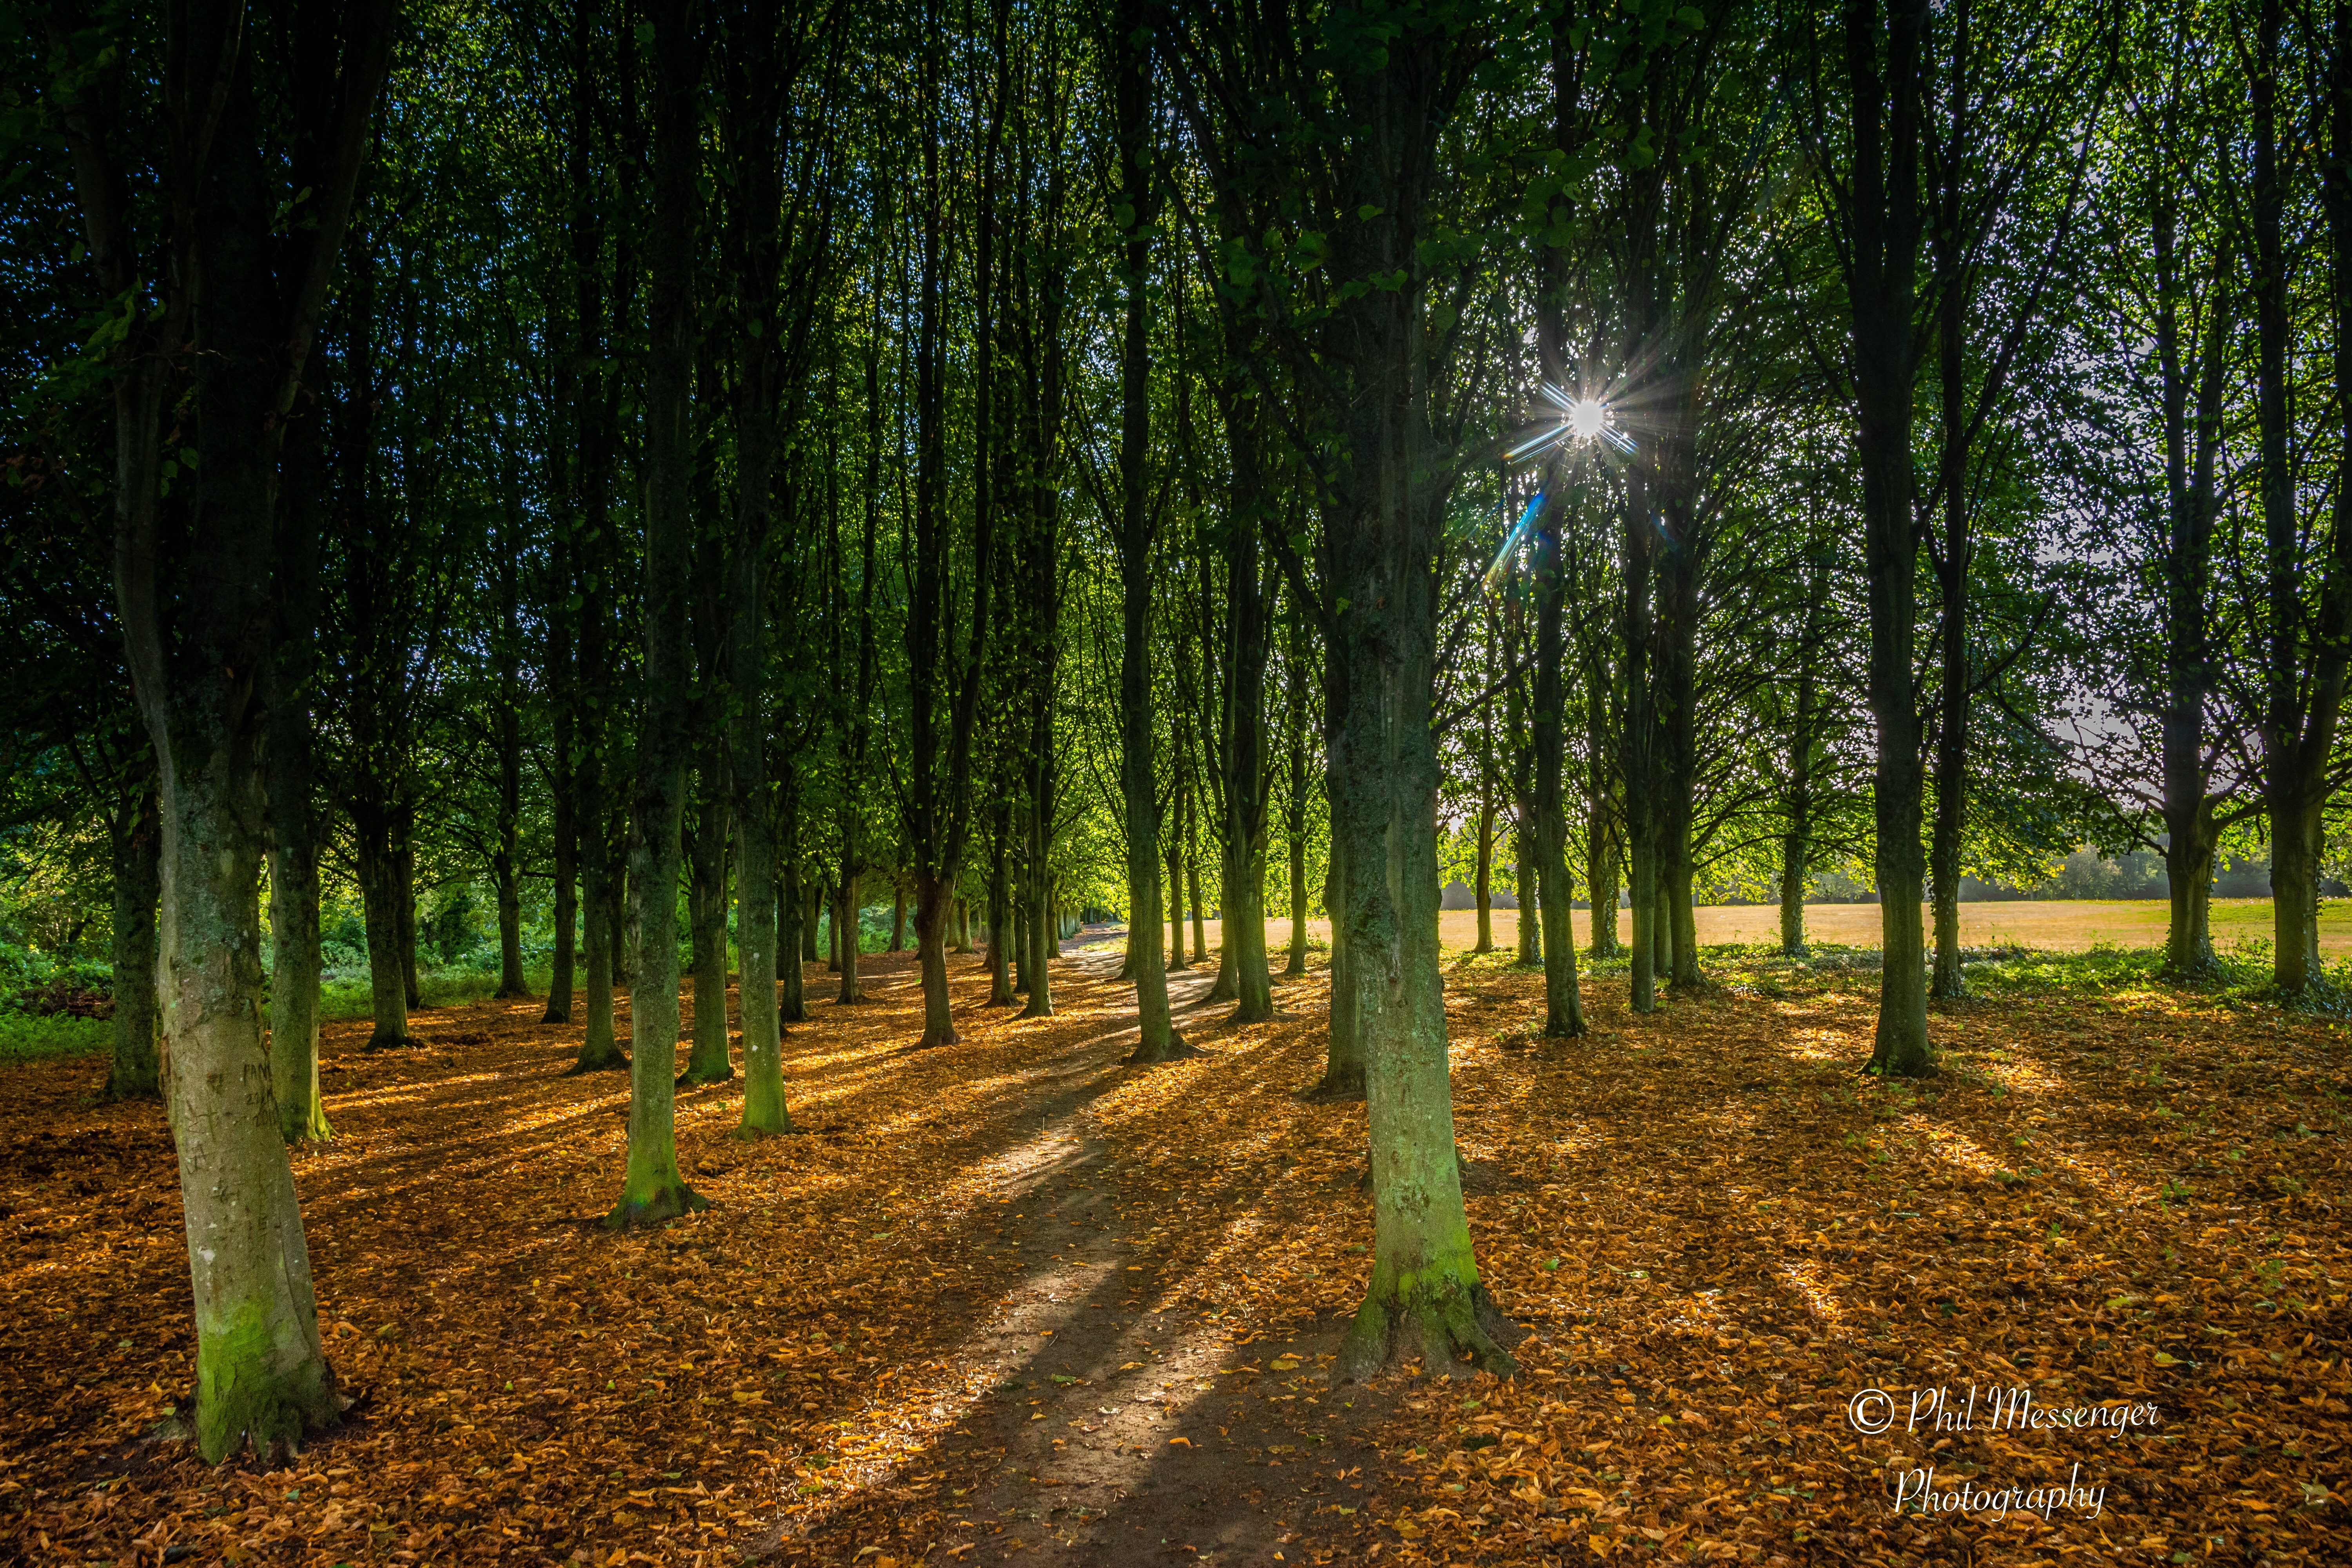 The late afternoon sun shining through the beech trees at Coate Water Swindon lighting up the golden autumnal ground.